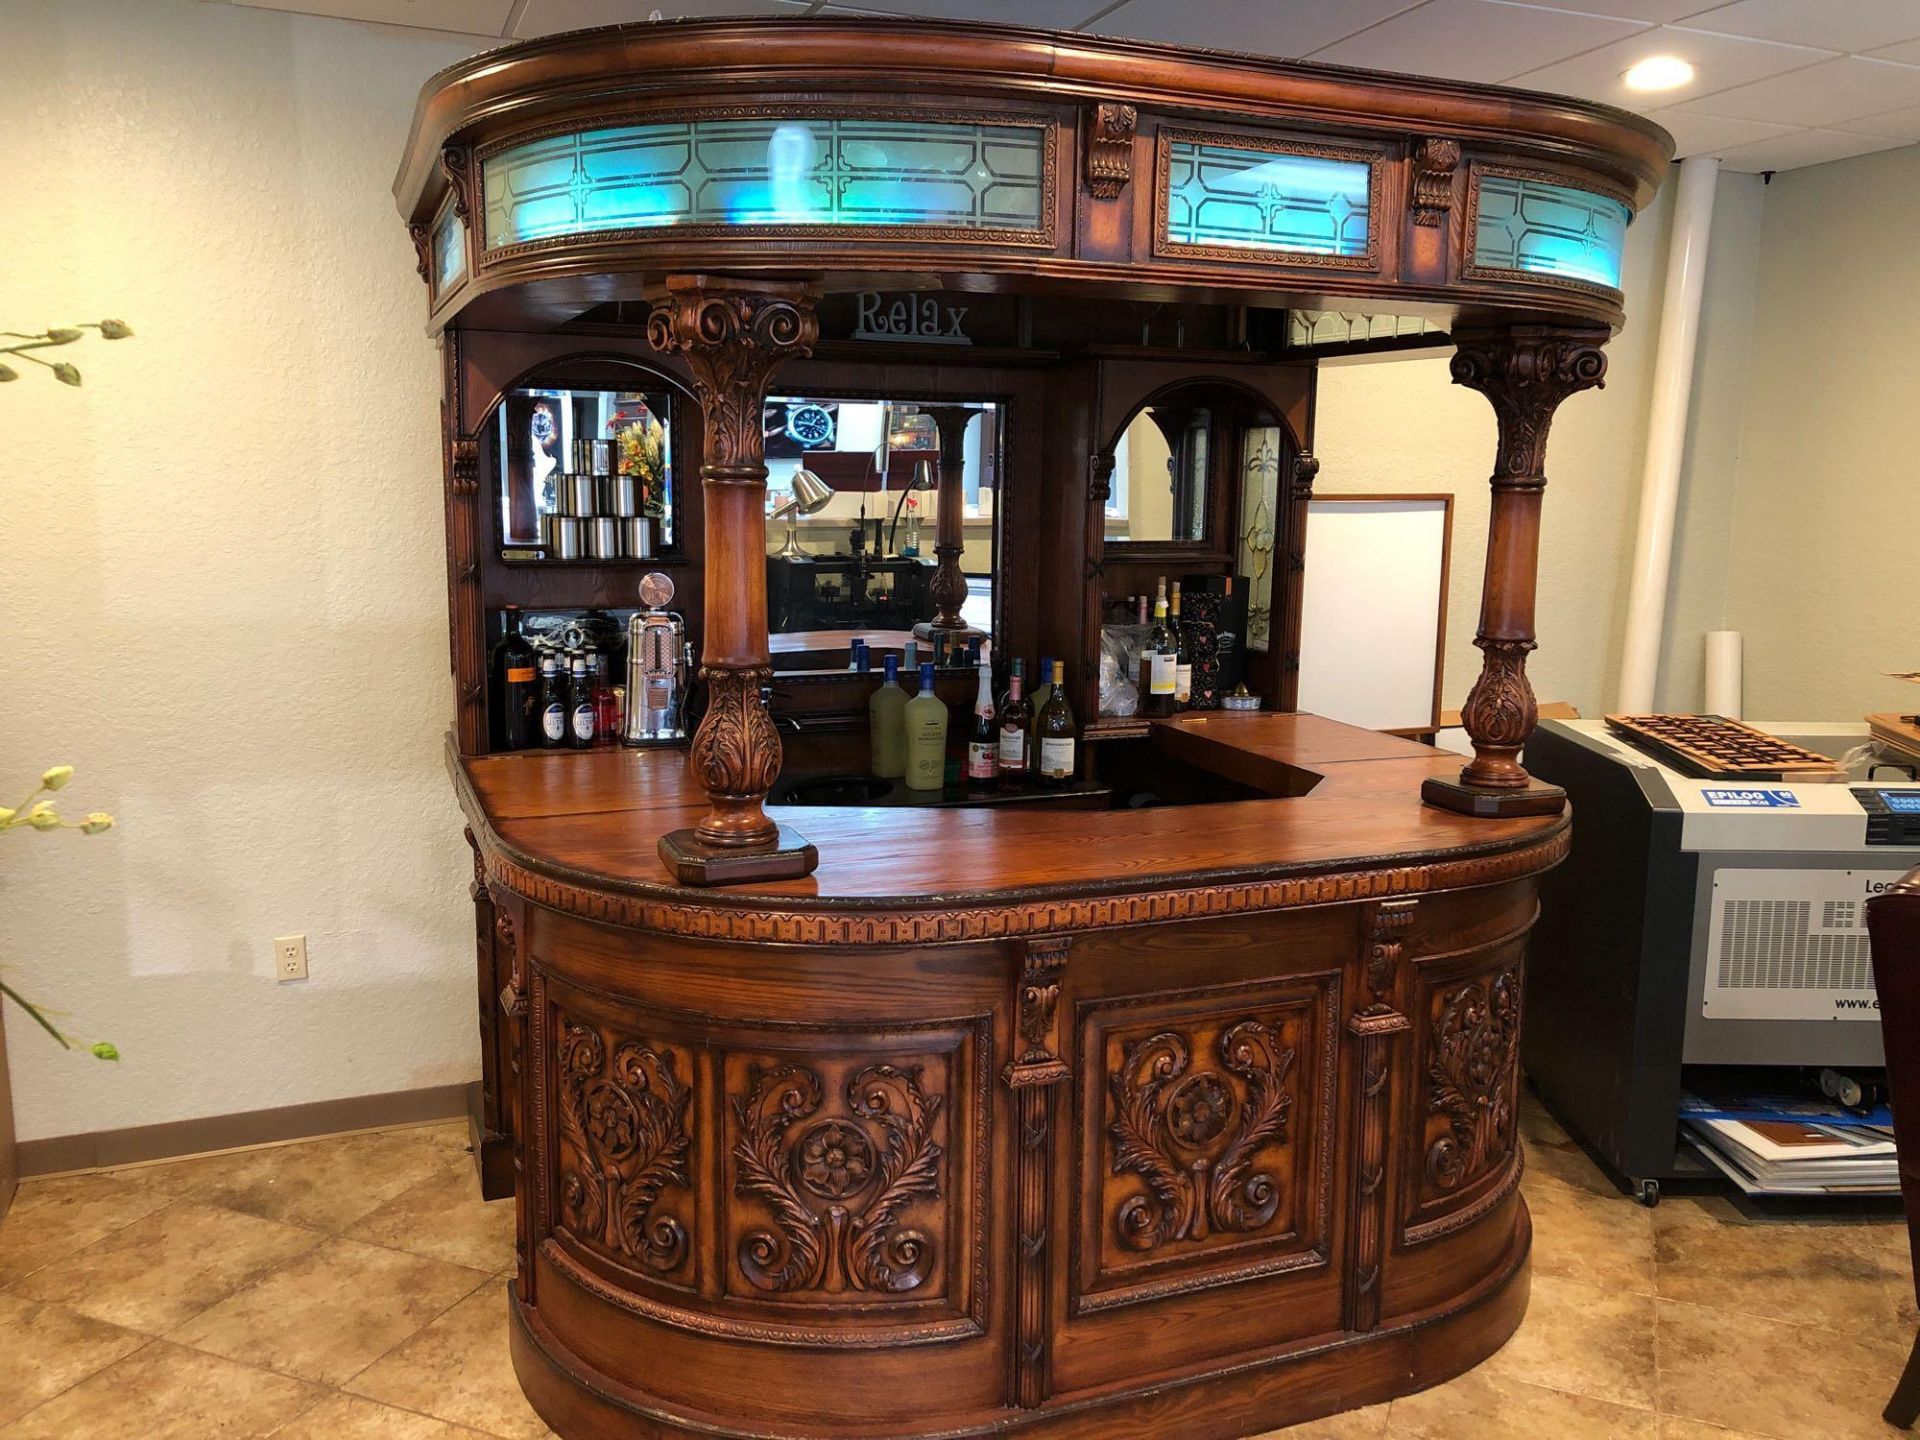 CUSTOM CARVED WOOD BAR WITH SINK. CURVED GLASS; LED LIGHTS. APPROX 72"'DEEP X 90"'WIDE X 92"TALL (DO